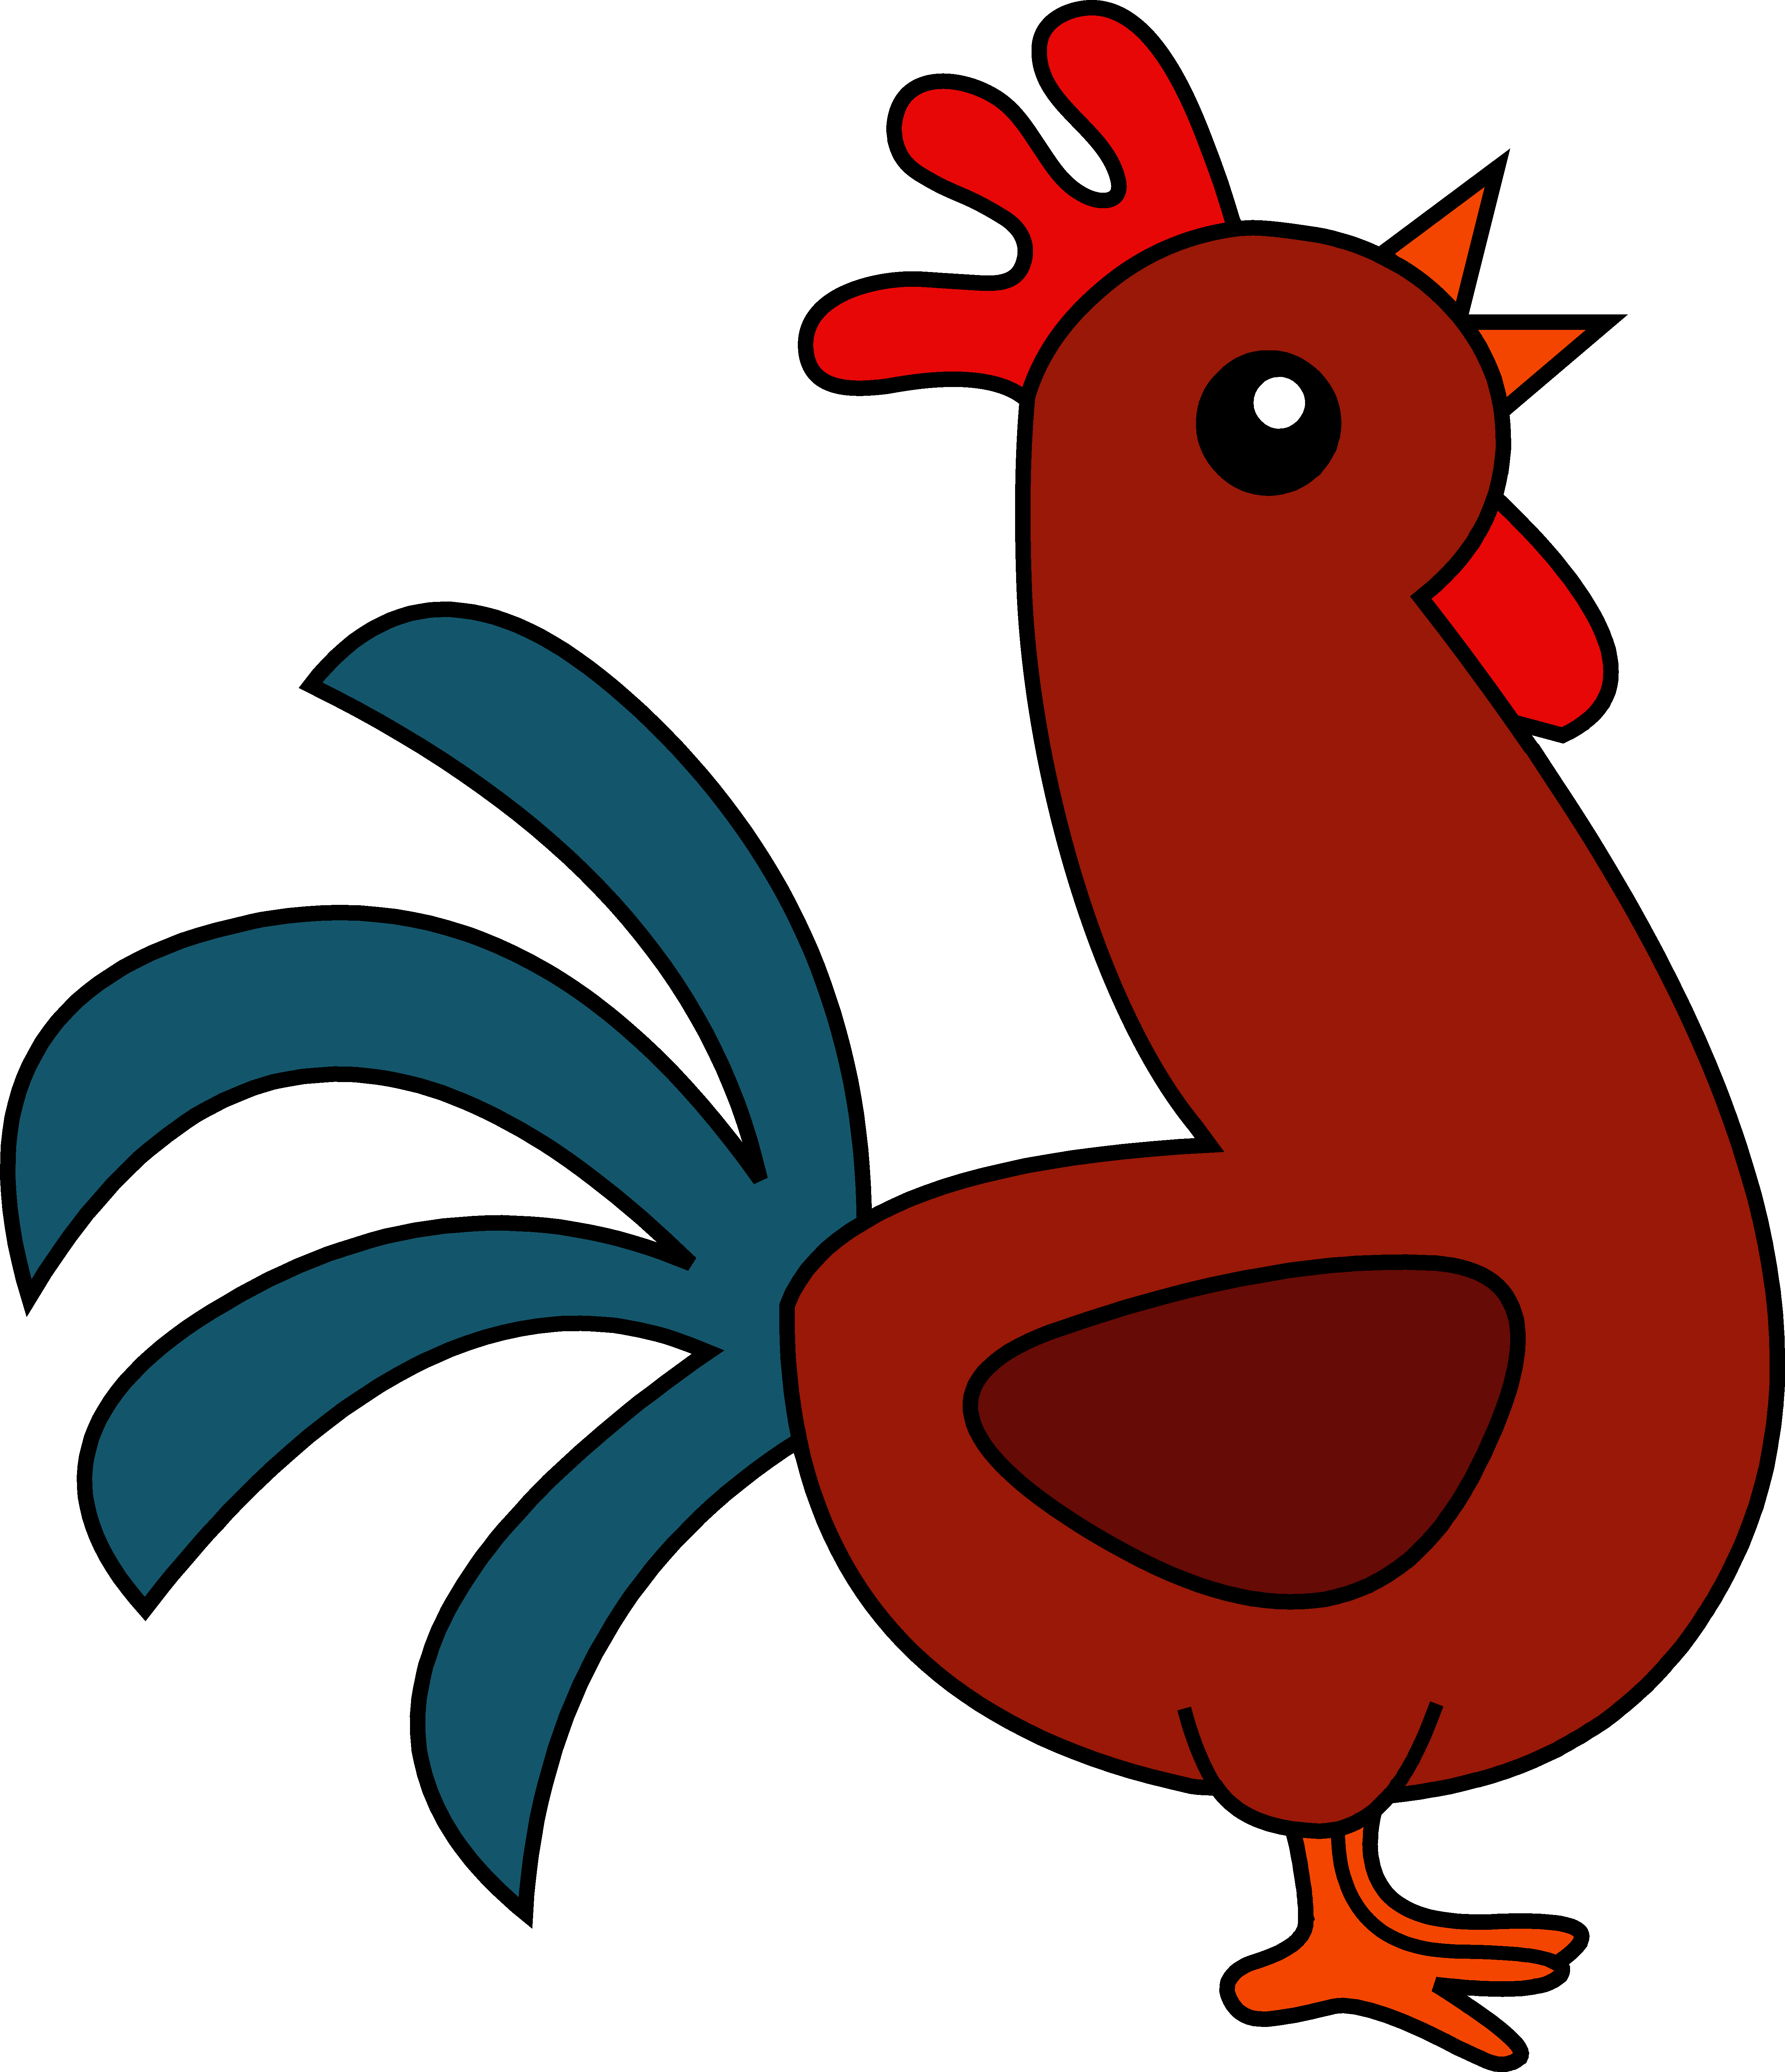 rooster animation clipart - photo #13